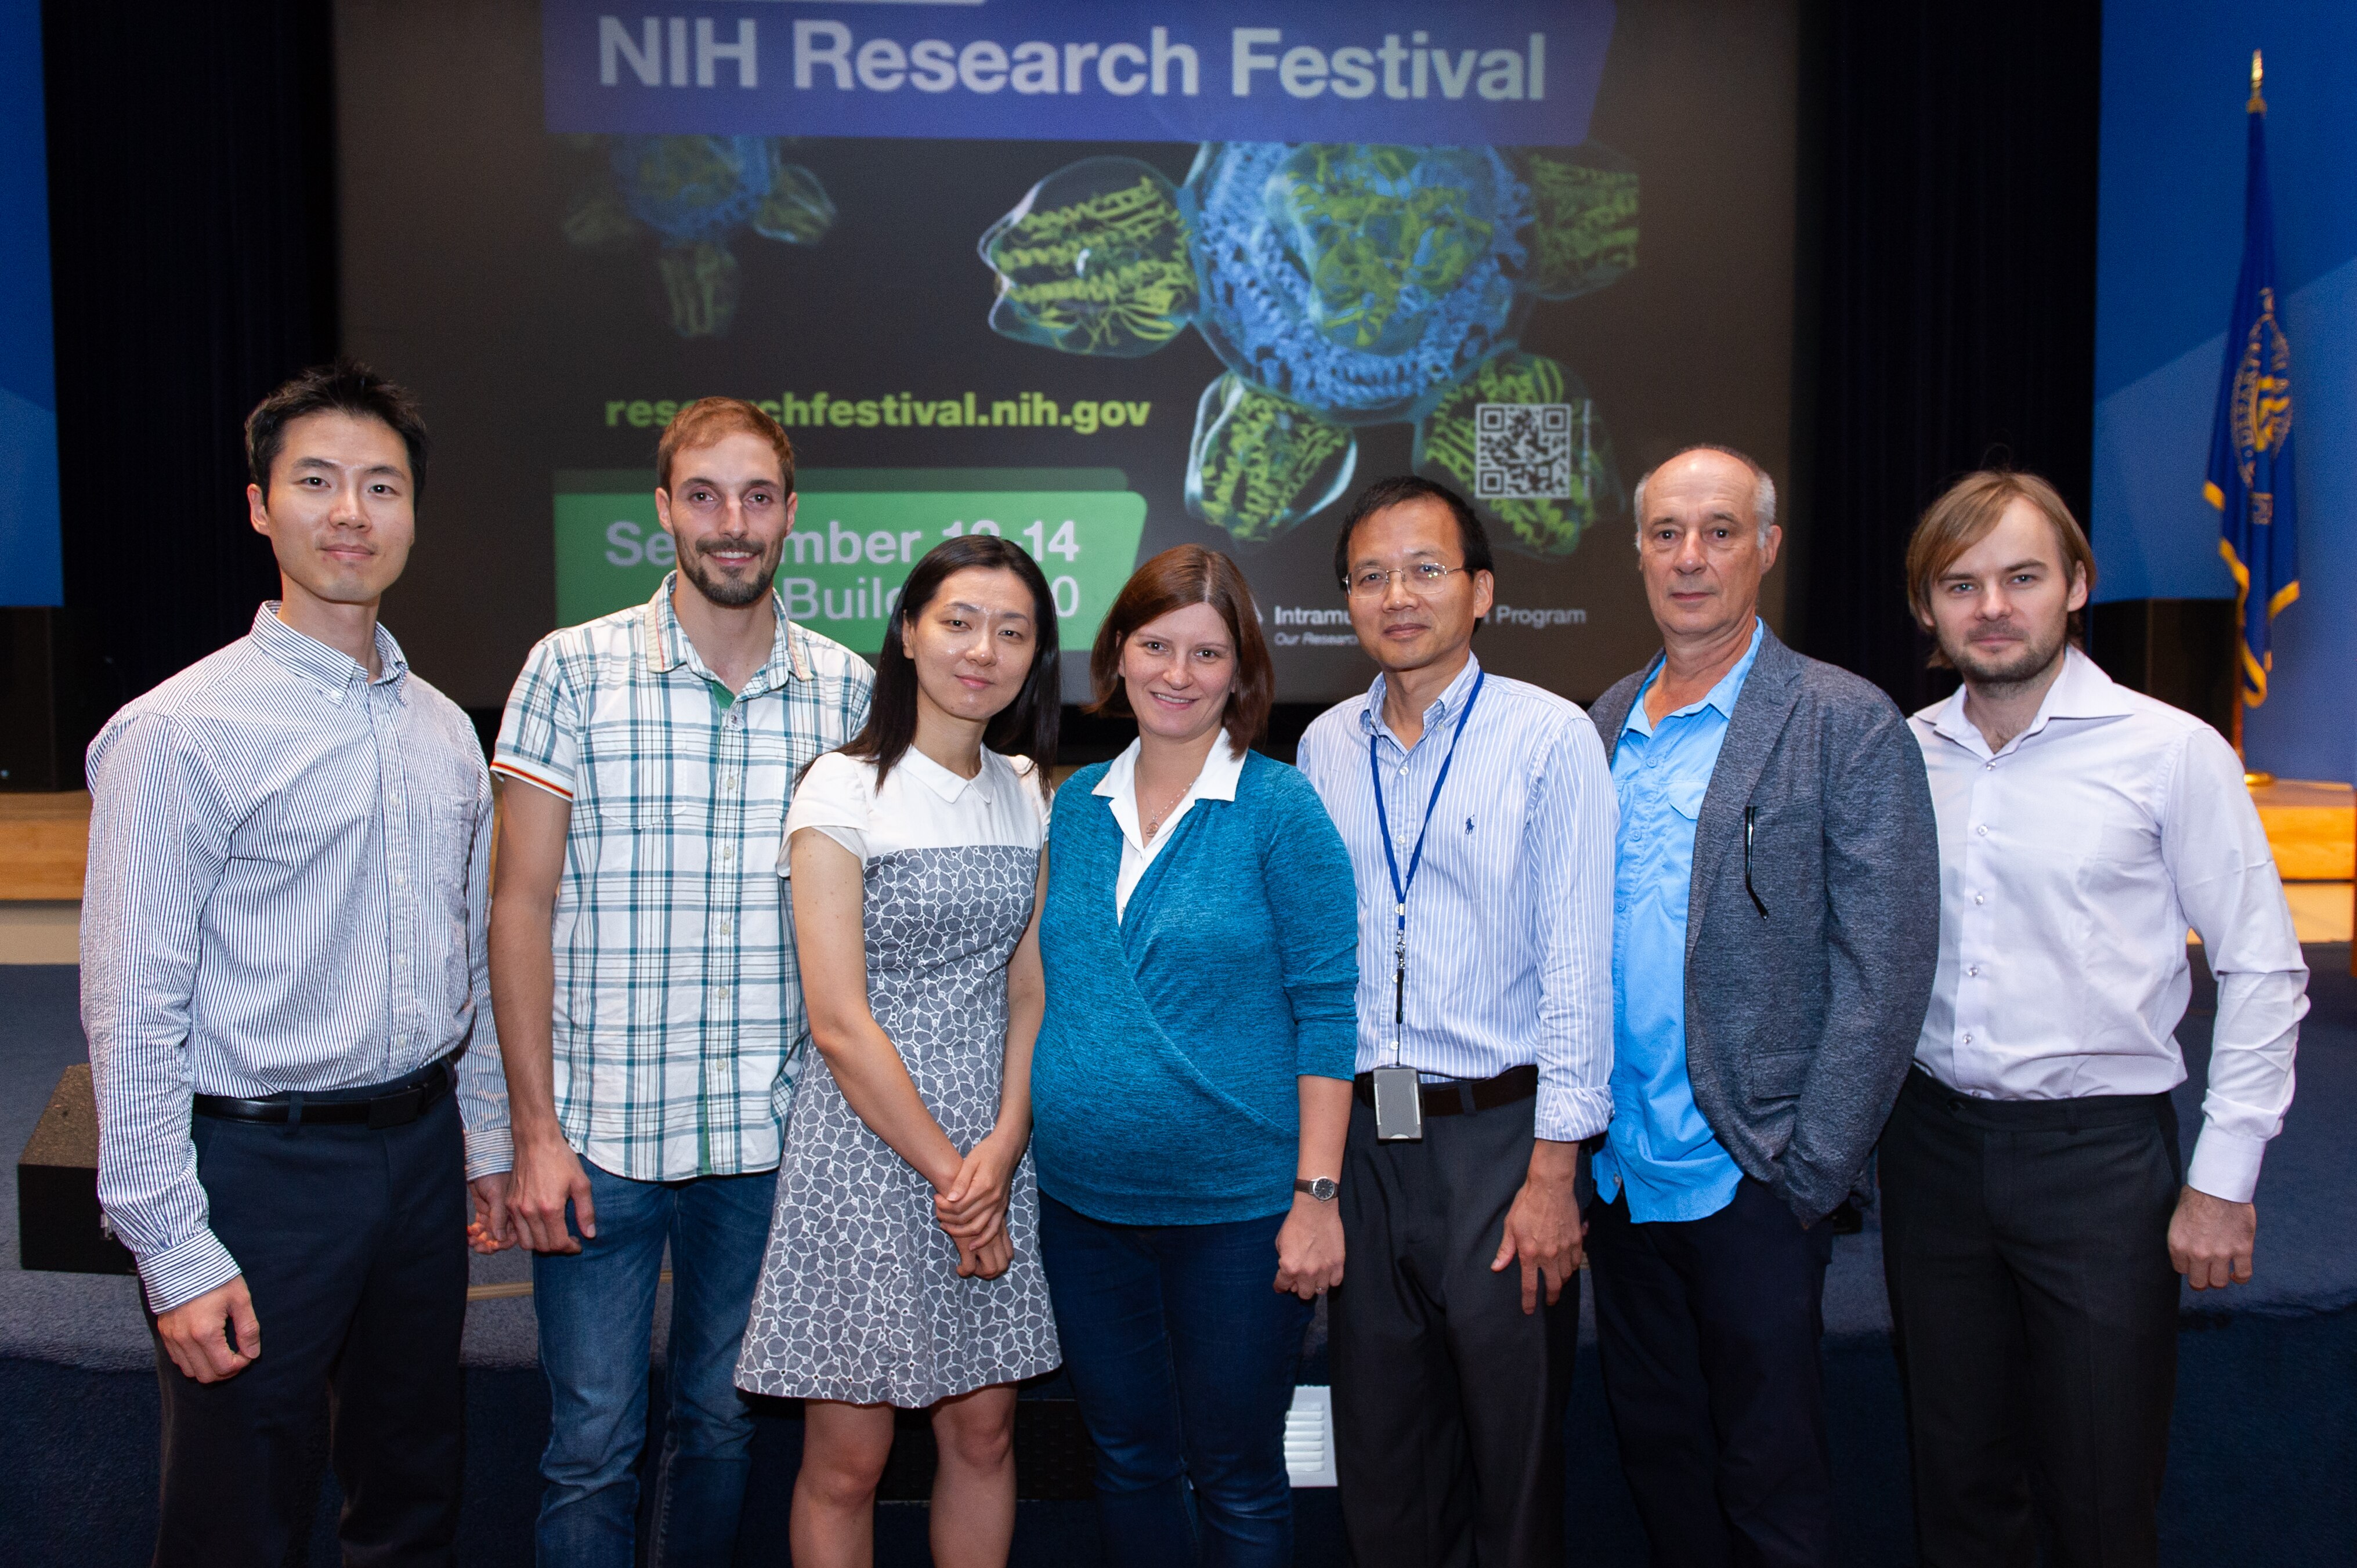 Laboratory of Genetics and Physiology team members standing and smiling in front of a screen that says “NIH Research Festival”.